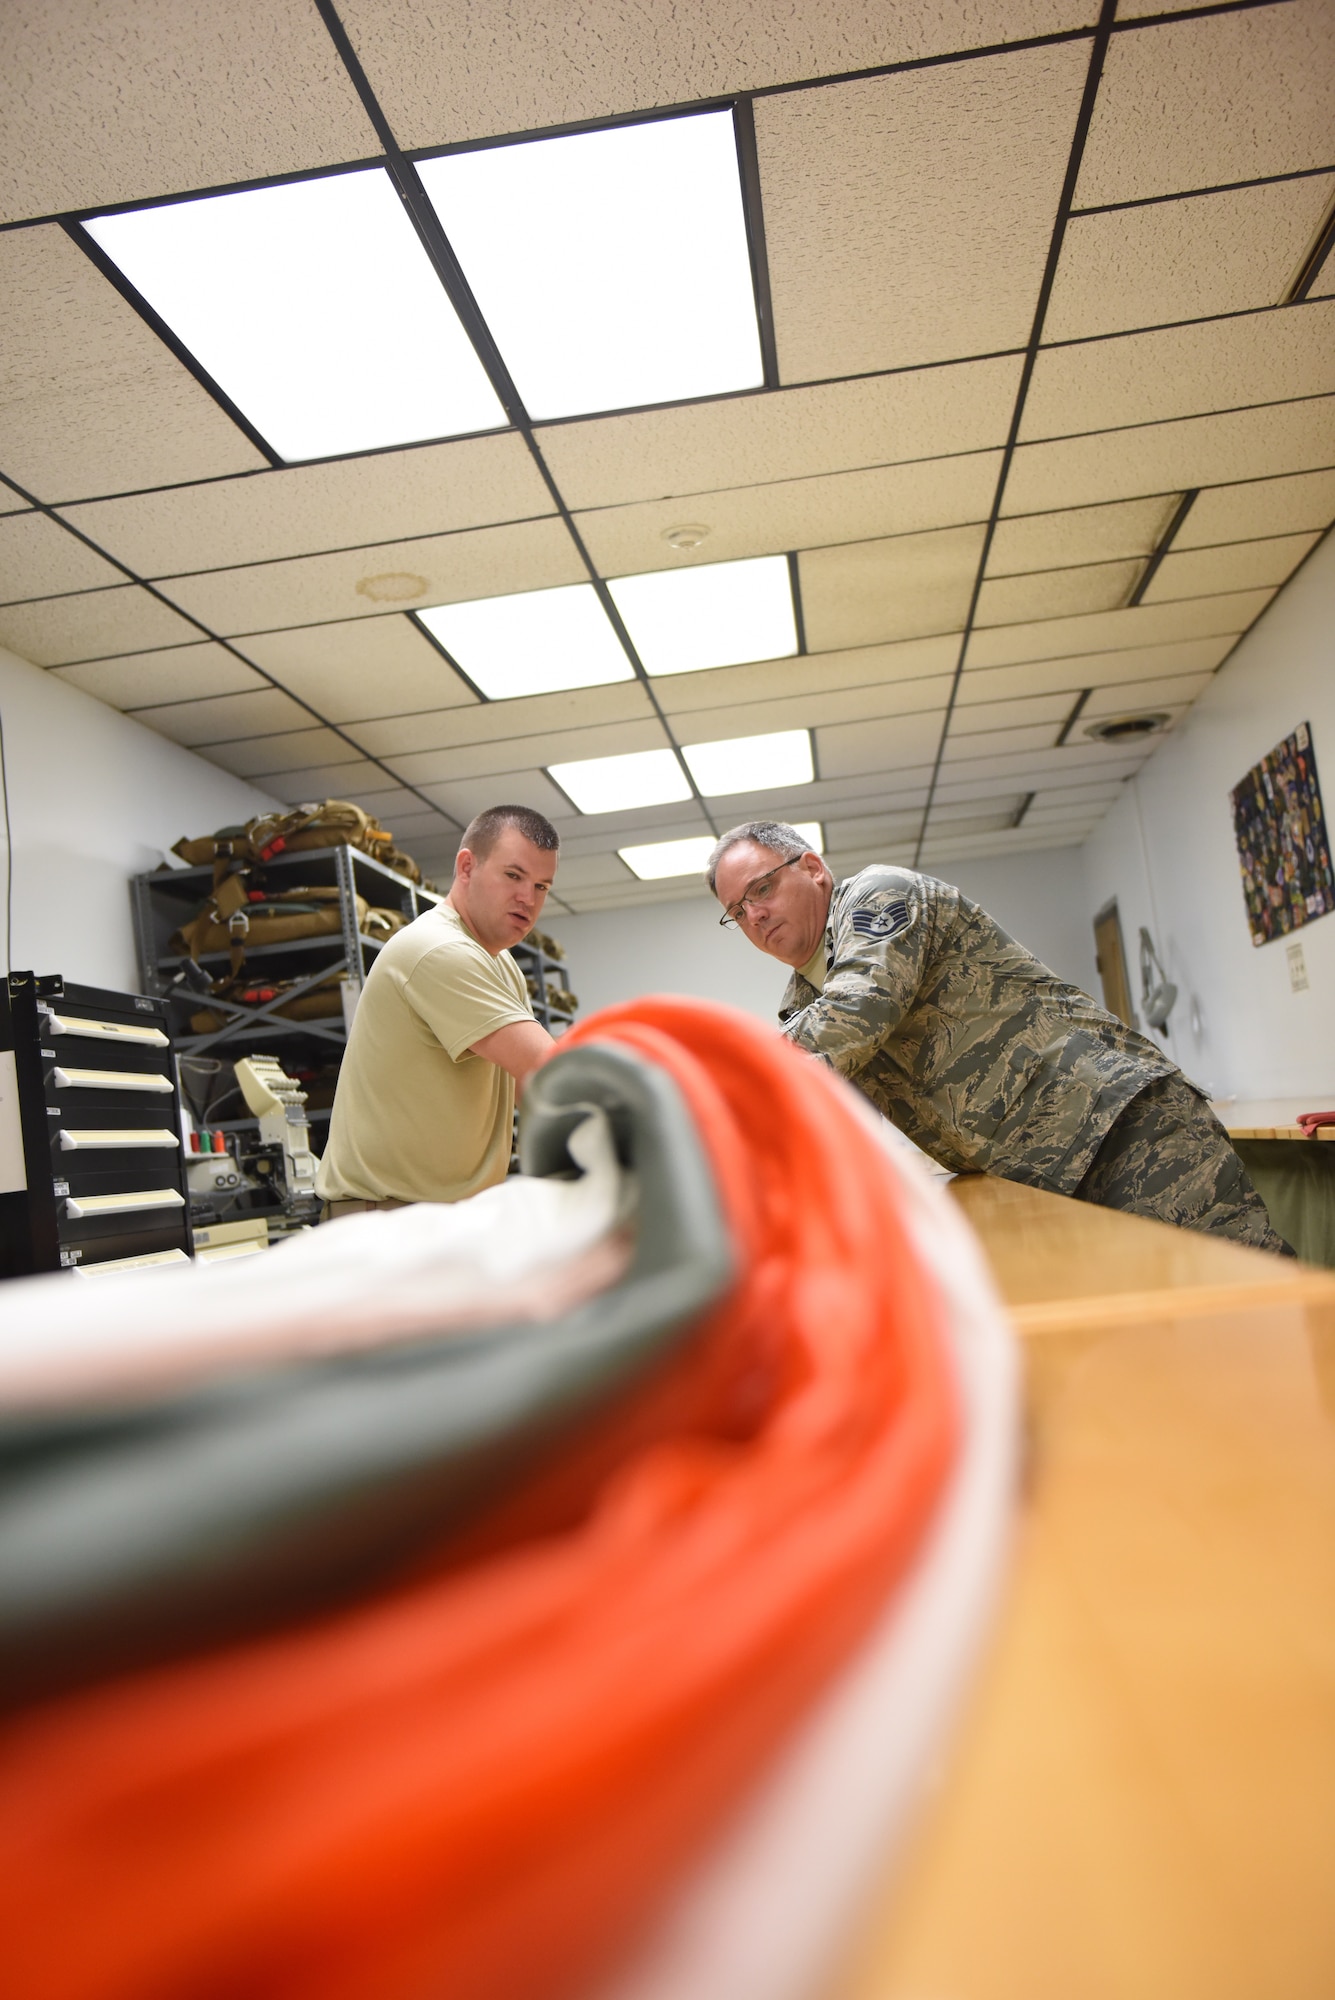 Tech. Sgt. Kurt Mellott and Staff Sgt. Stephen Falker, aircrew flight equipment technicians with the 193rd Special Operations Support Squadron, Middletown, Pennsylvania, Pennsylvania Air National Guard, build a Low-Profile Parachute from scratch Aug. 9, 2018. The new parachutes replaced the old ones, which were originally constructed in the 1980’s. (U.S. Air National Guard photo by Senior Airman Julia Sorber/Released)